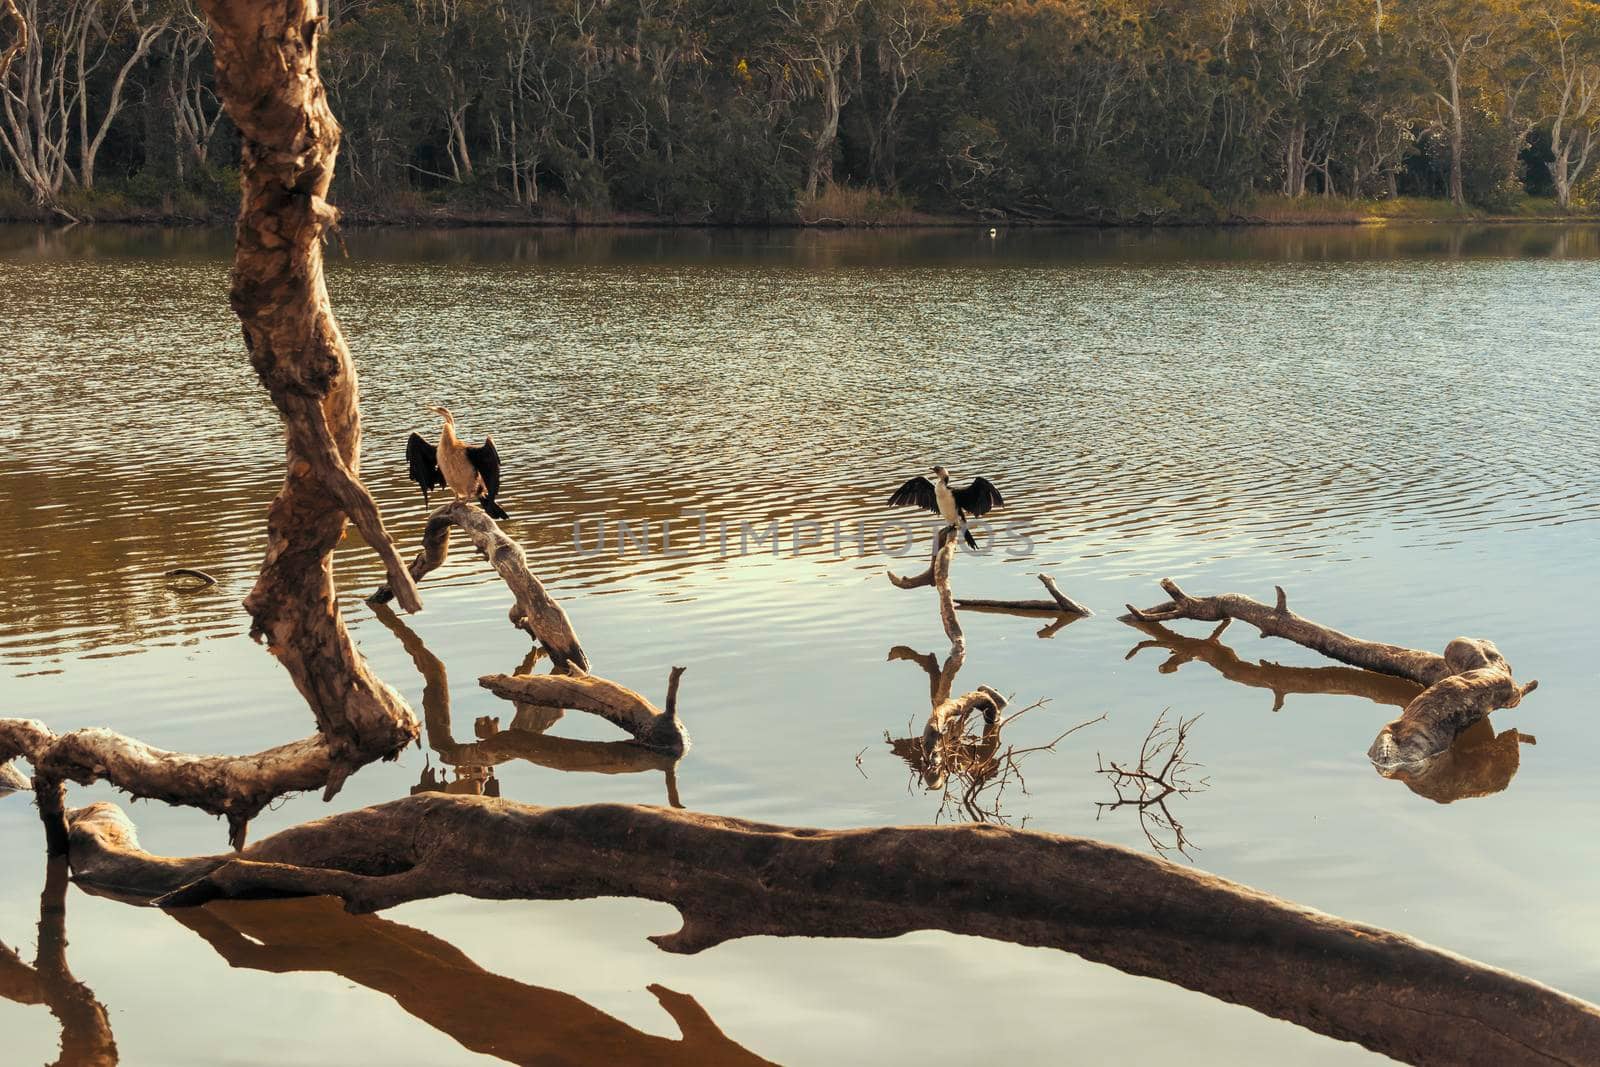 Photograph of water birds sitting on tree branches in the water at Avoca Lagoon on the Central Coast in New South Wales in Australia